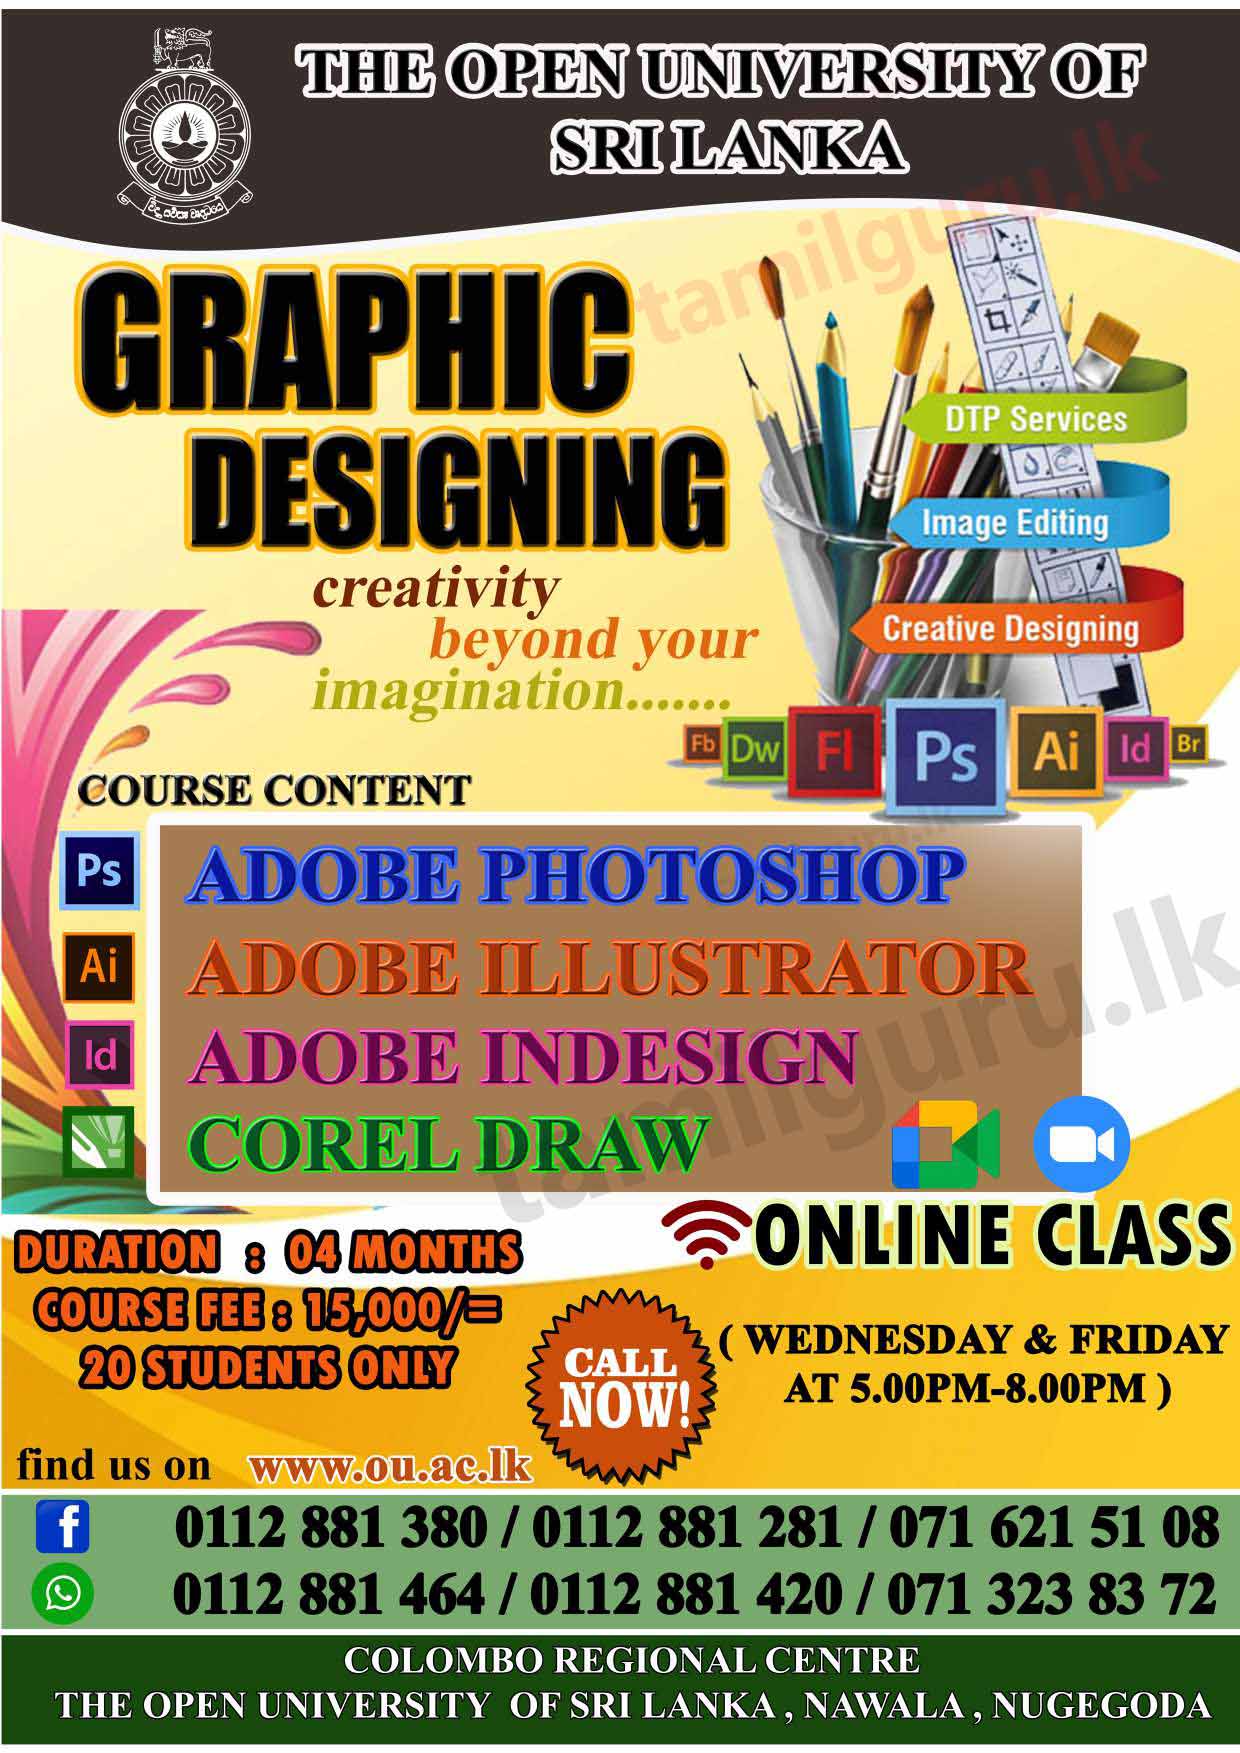 Short Course in Graphic Designing (Online) - The Open University of Sri Lanka (OUSL)